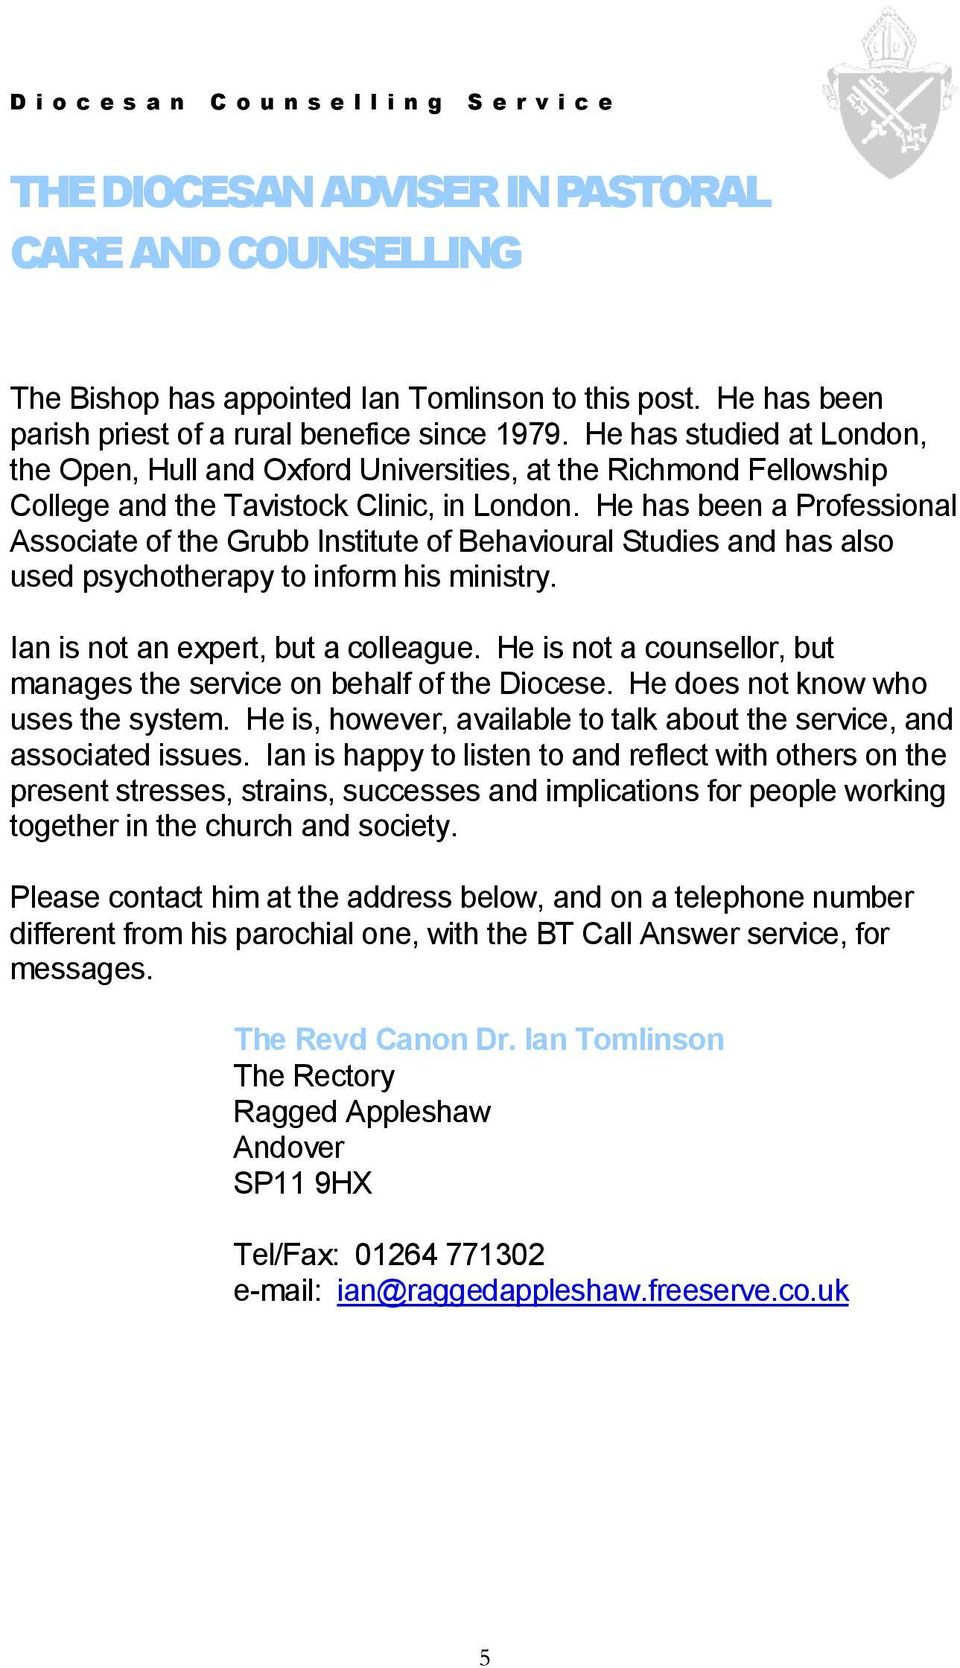 He has been a Professional Associate of the Grubb Institute of Behavioural Studies and has also used psychotherapy to inform his ministry. Ian is not an expert, but a colleague.